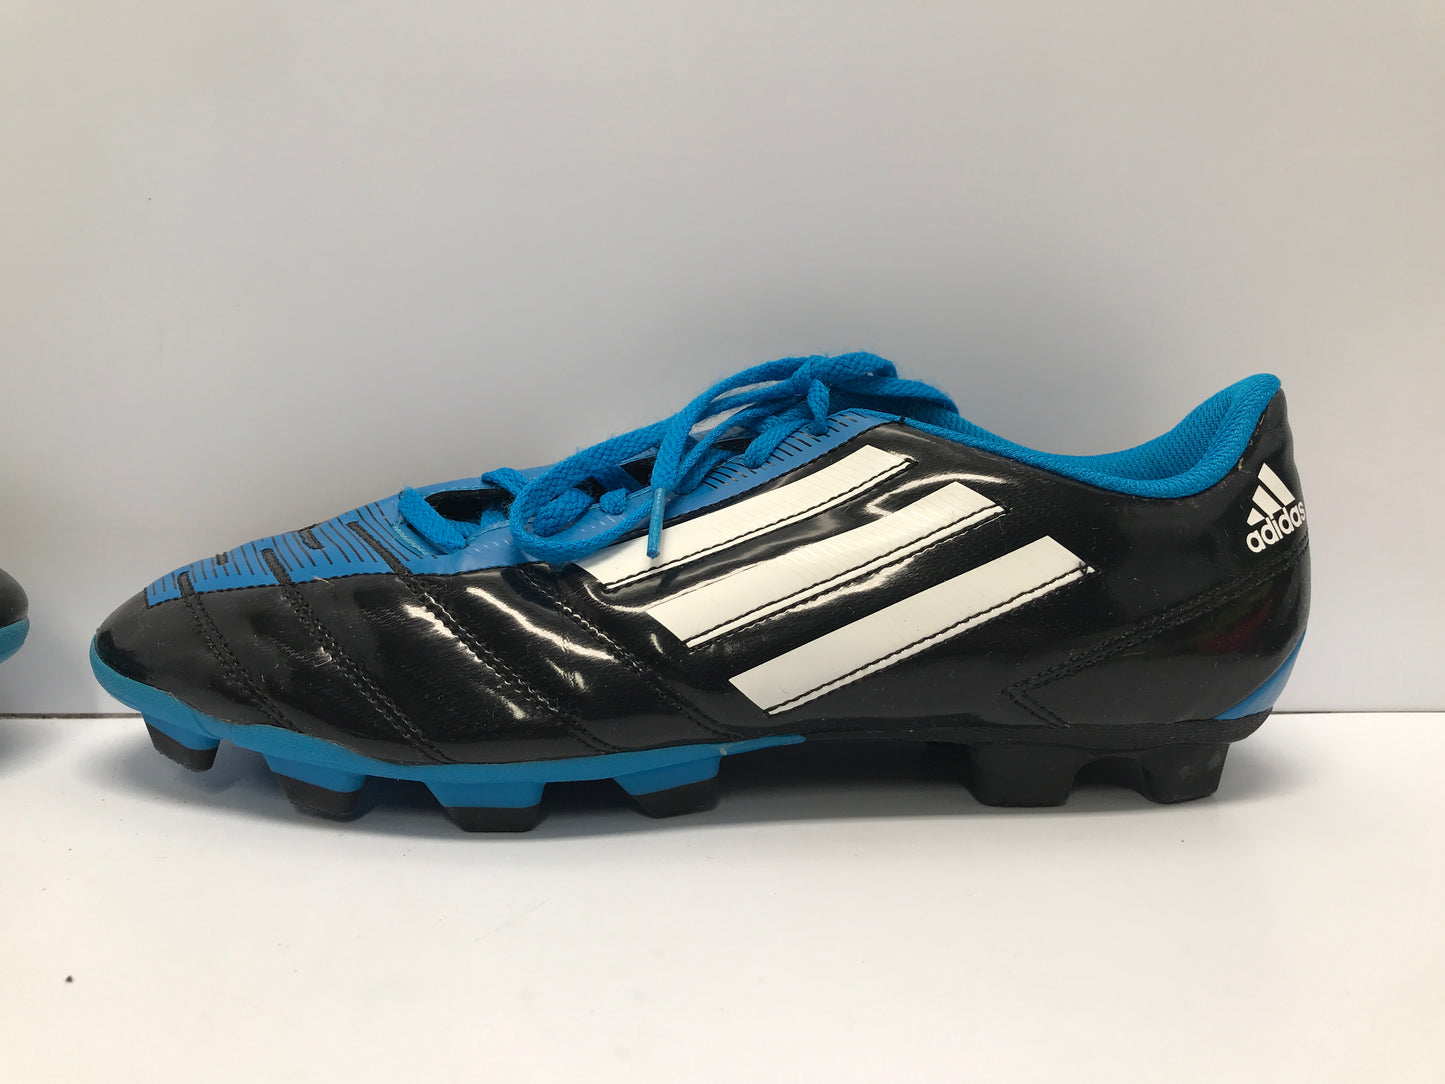 Soccer Shoes Cleats Men's Size 10 Adidas Blue Black Like New